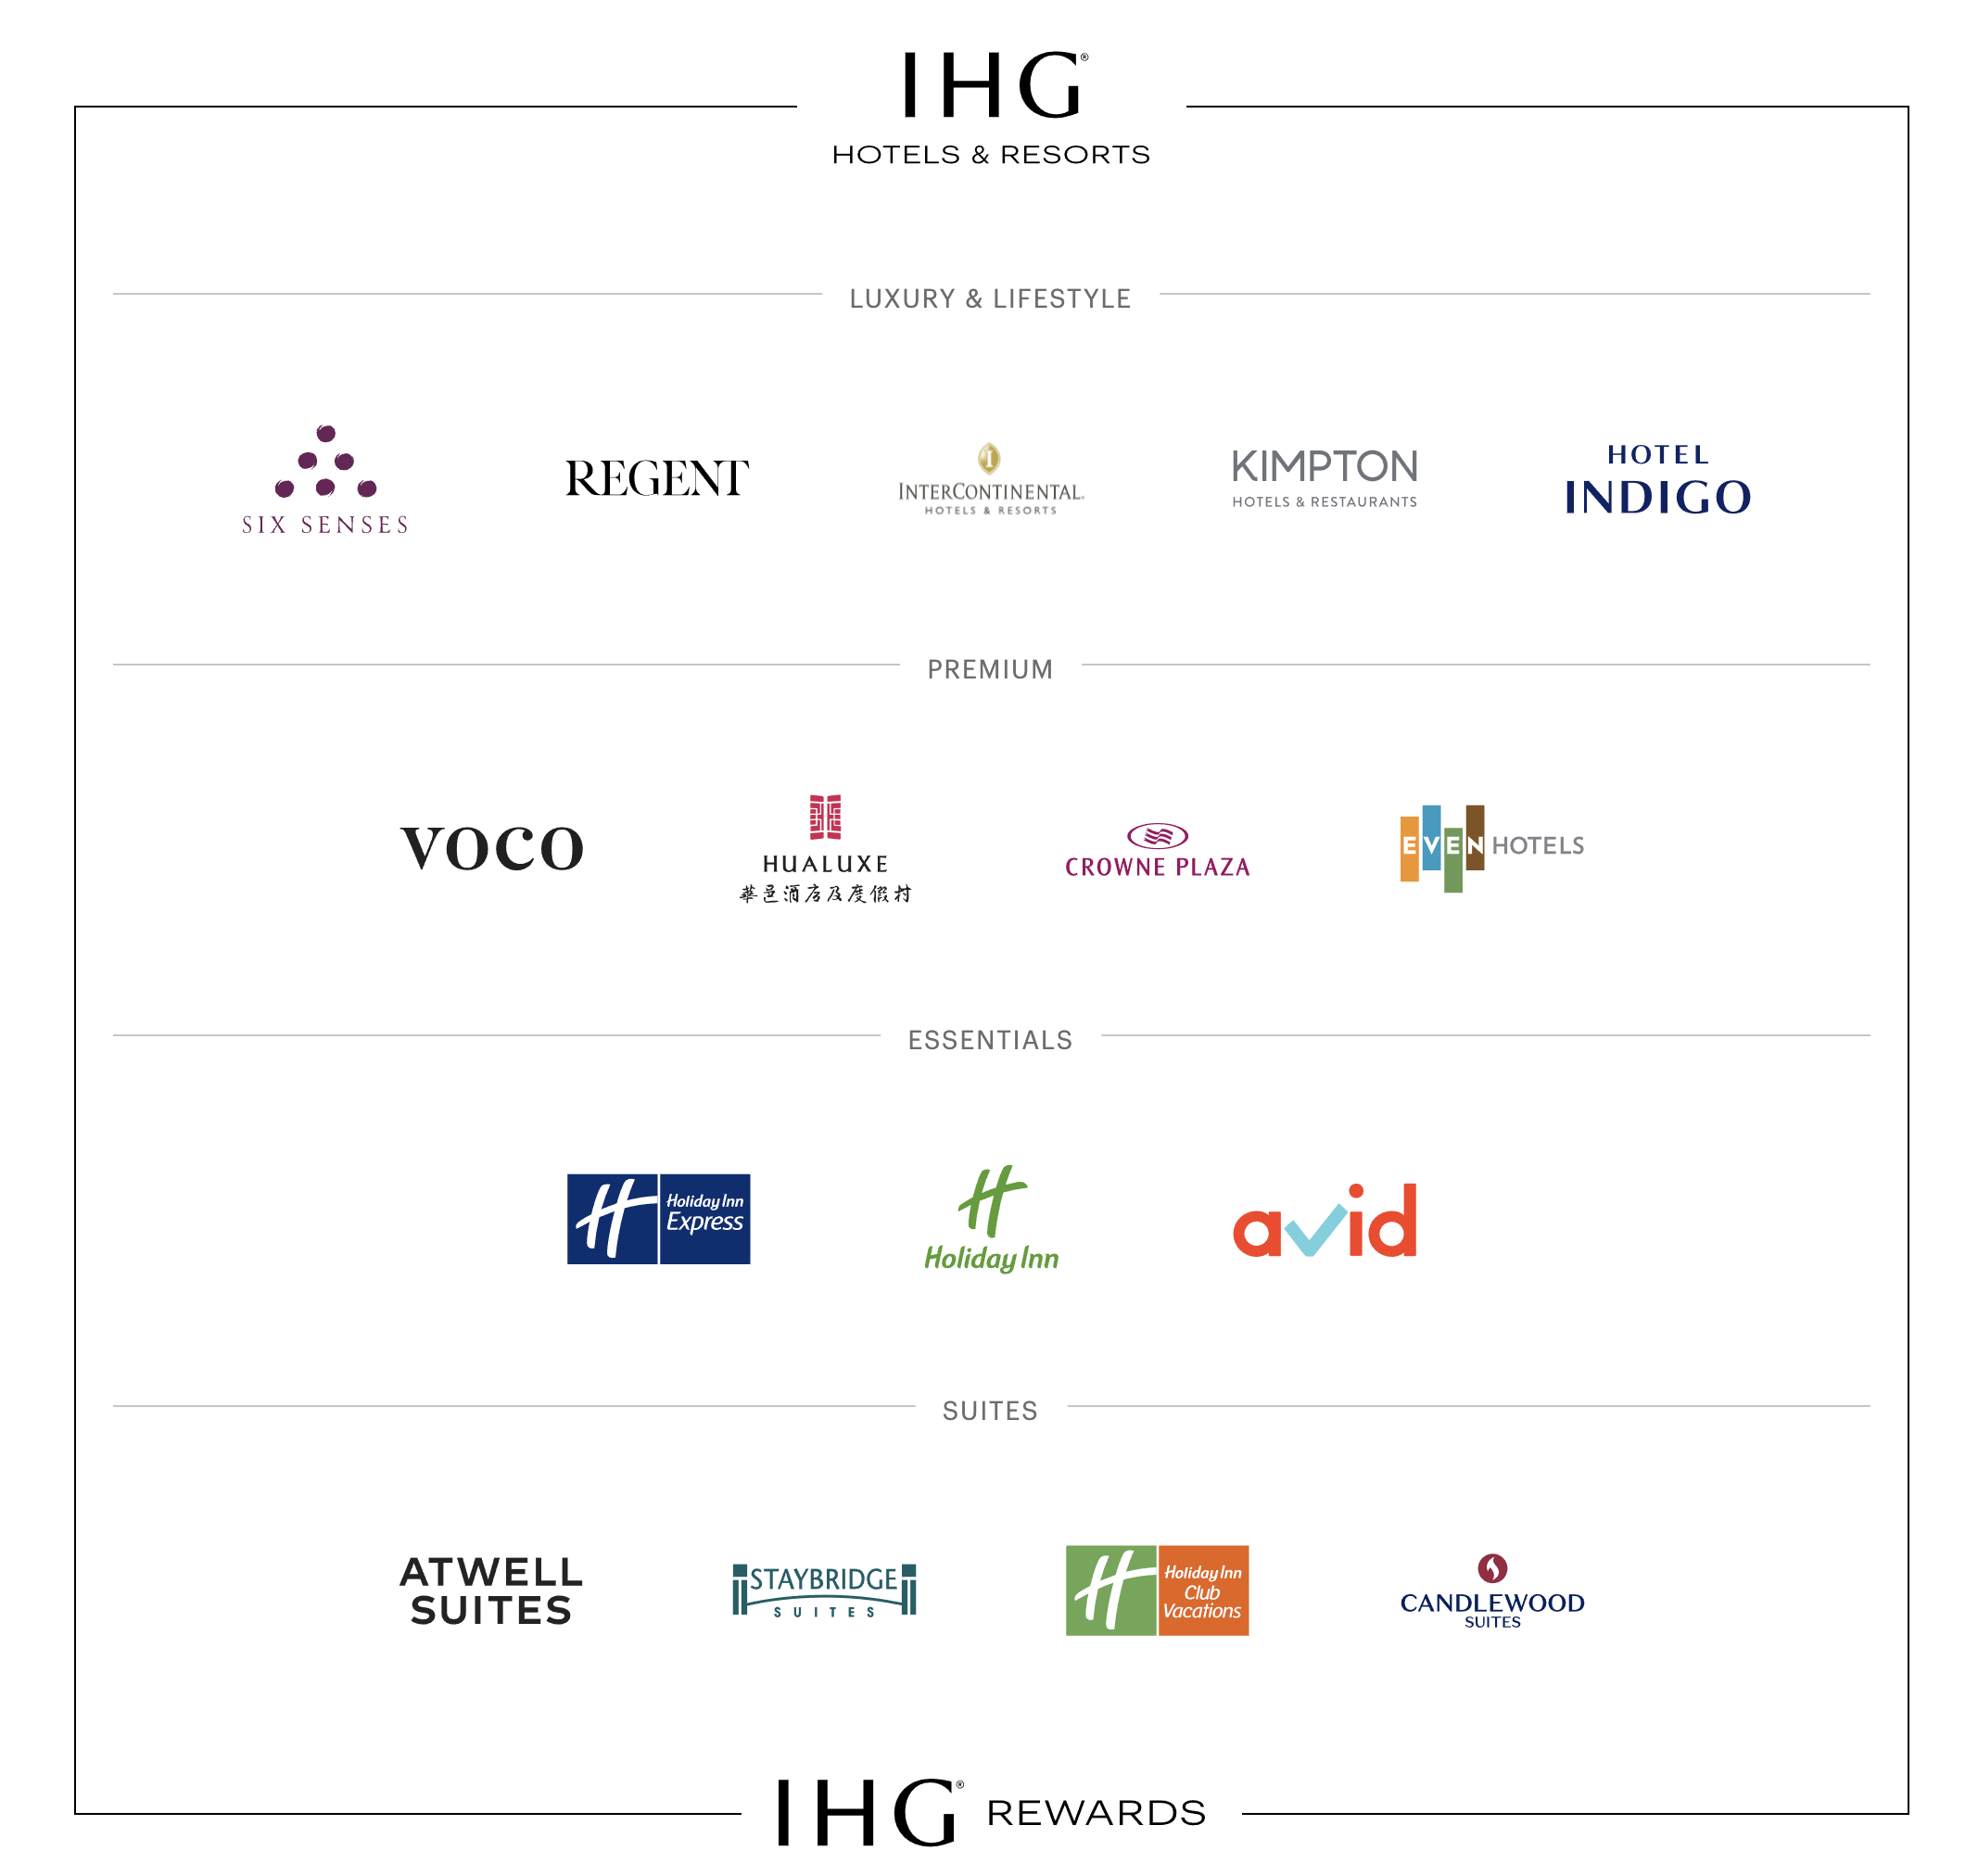 The Complete Guide to the IHG Rewards Program for 2021